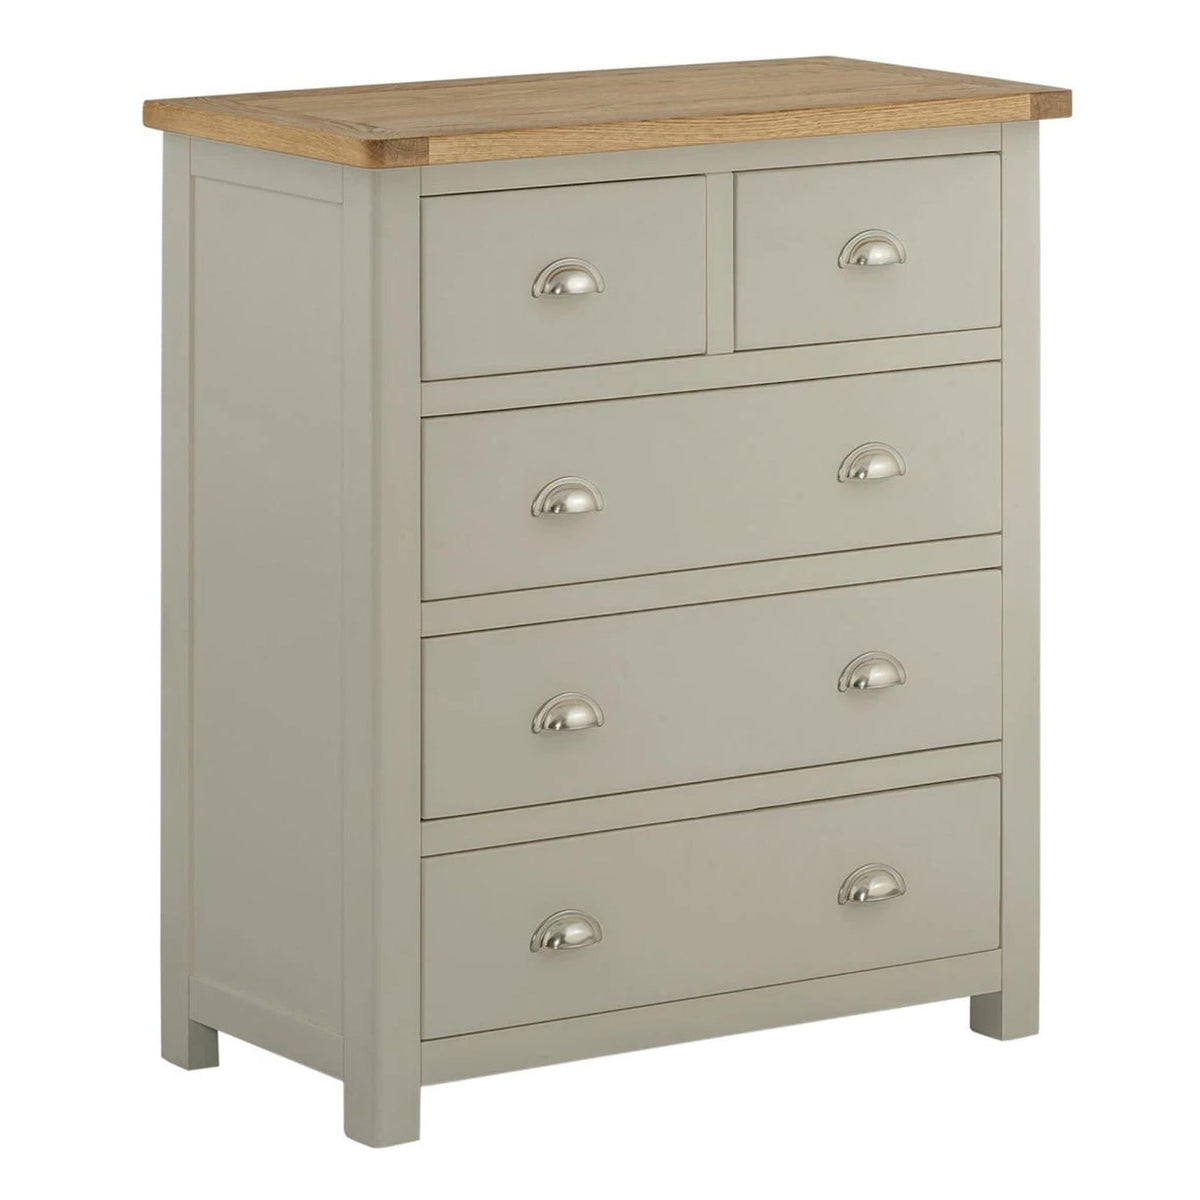 The Padstow Grey Wooden Chest of 5 Drawers with Oak Top 